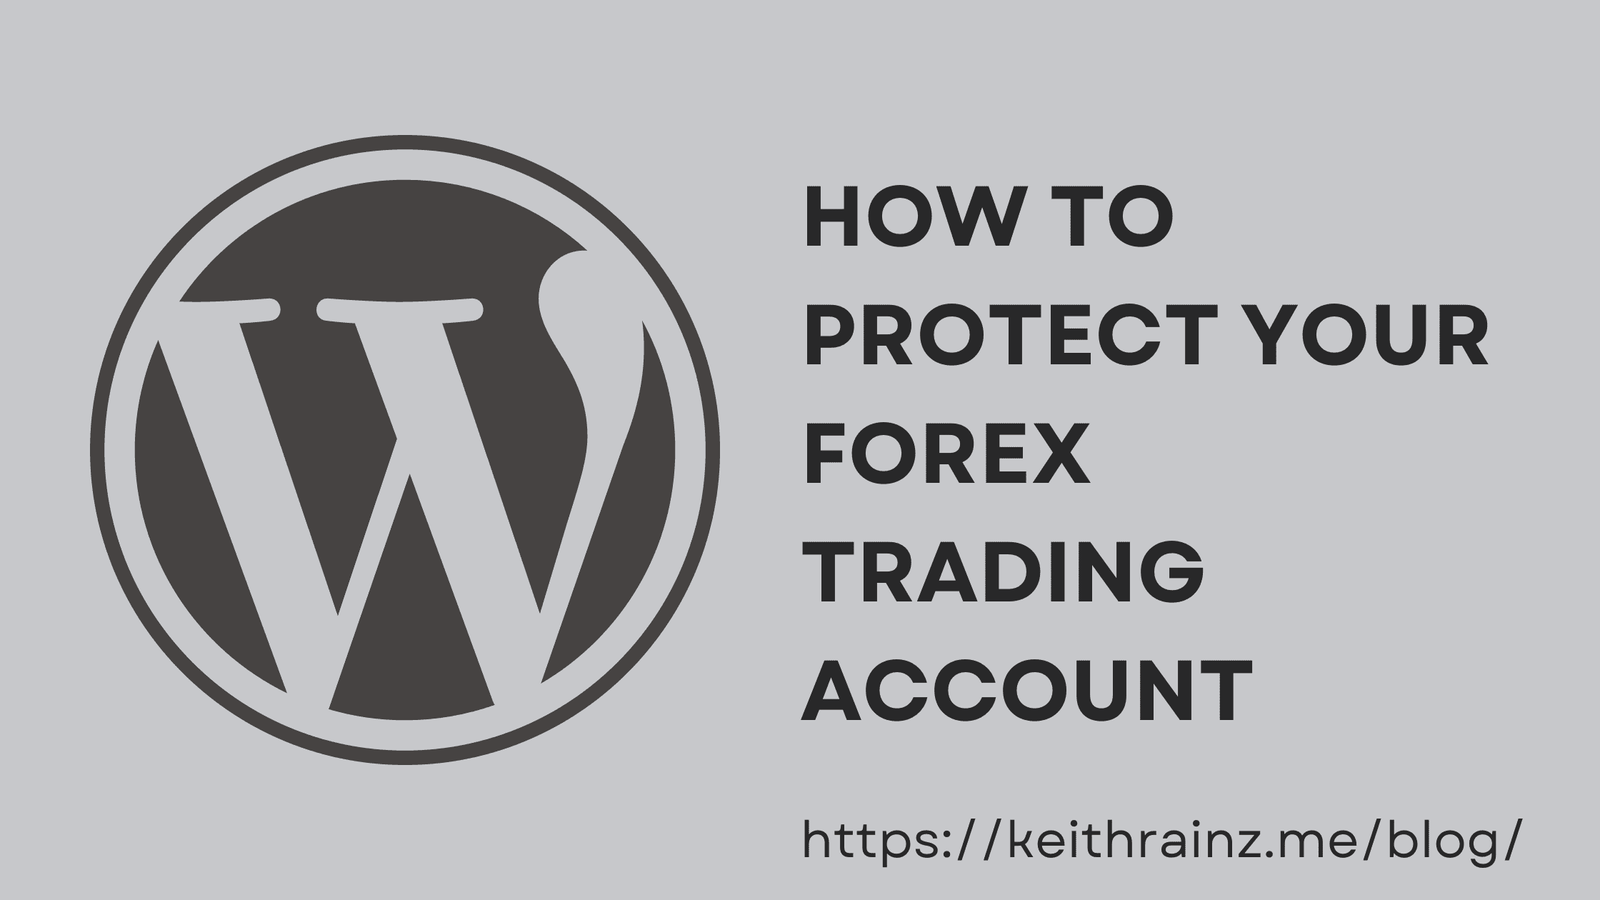 How to protect your forex trading account